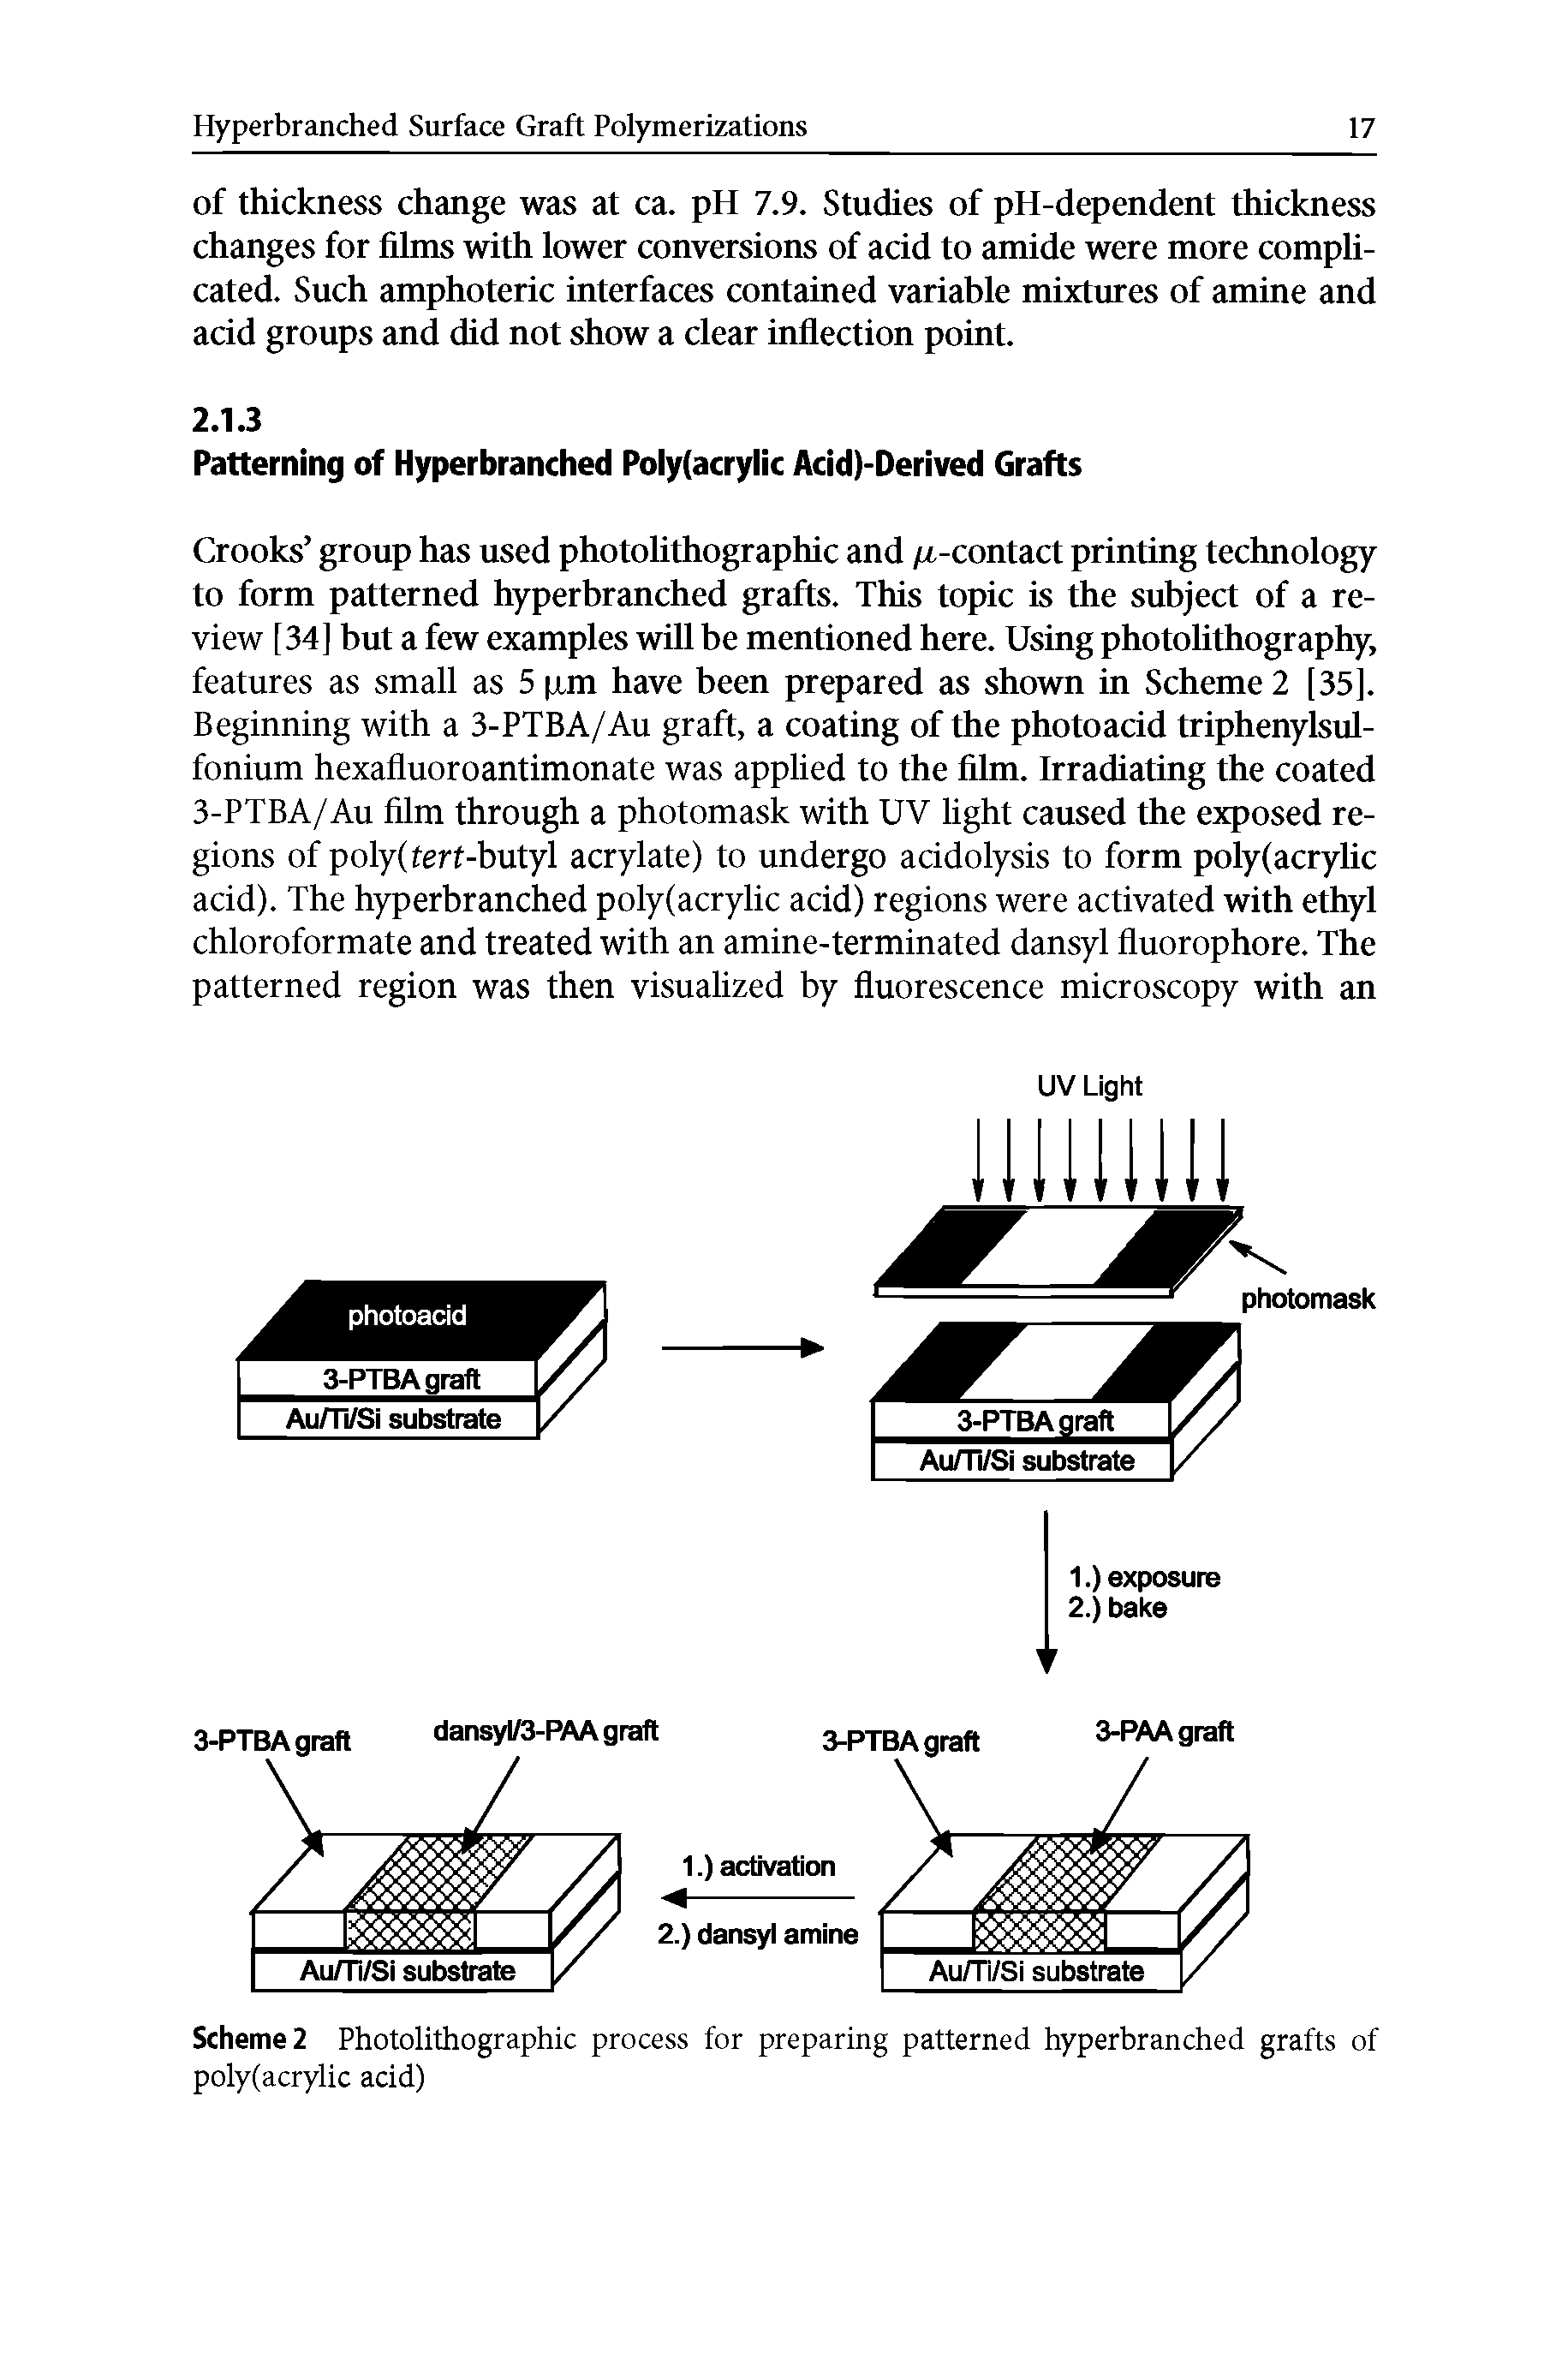 Scheme 2 Photolithographic process for preparing patterned hyperbranched grafts of poly(acrylic acid)...